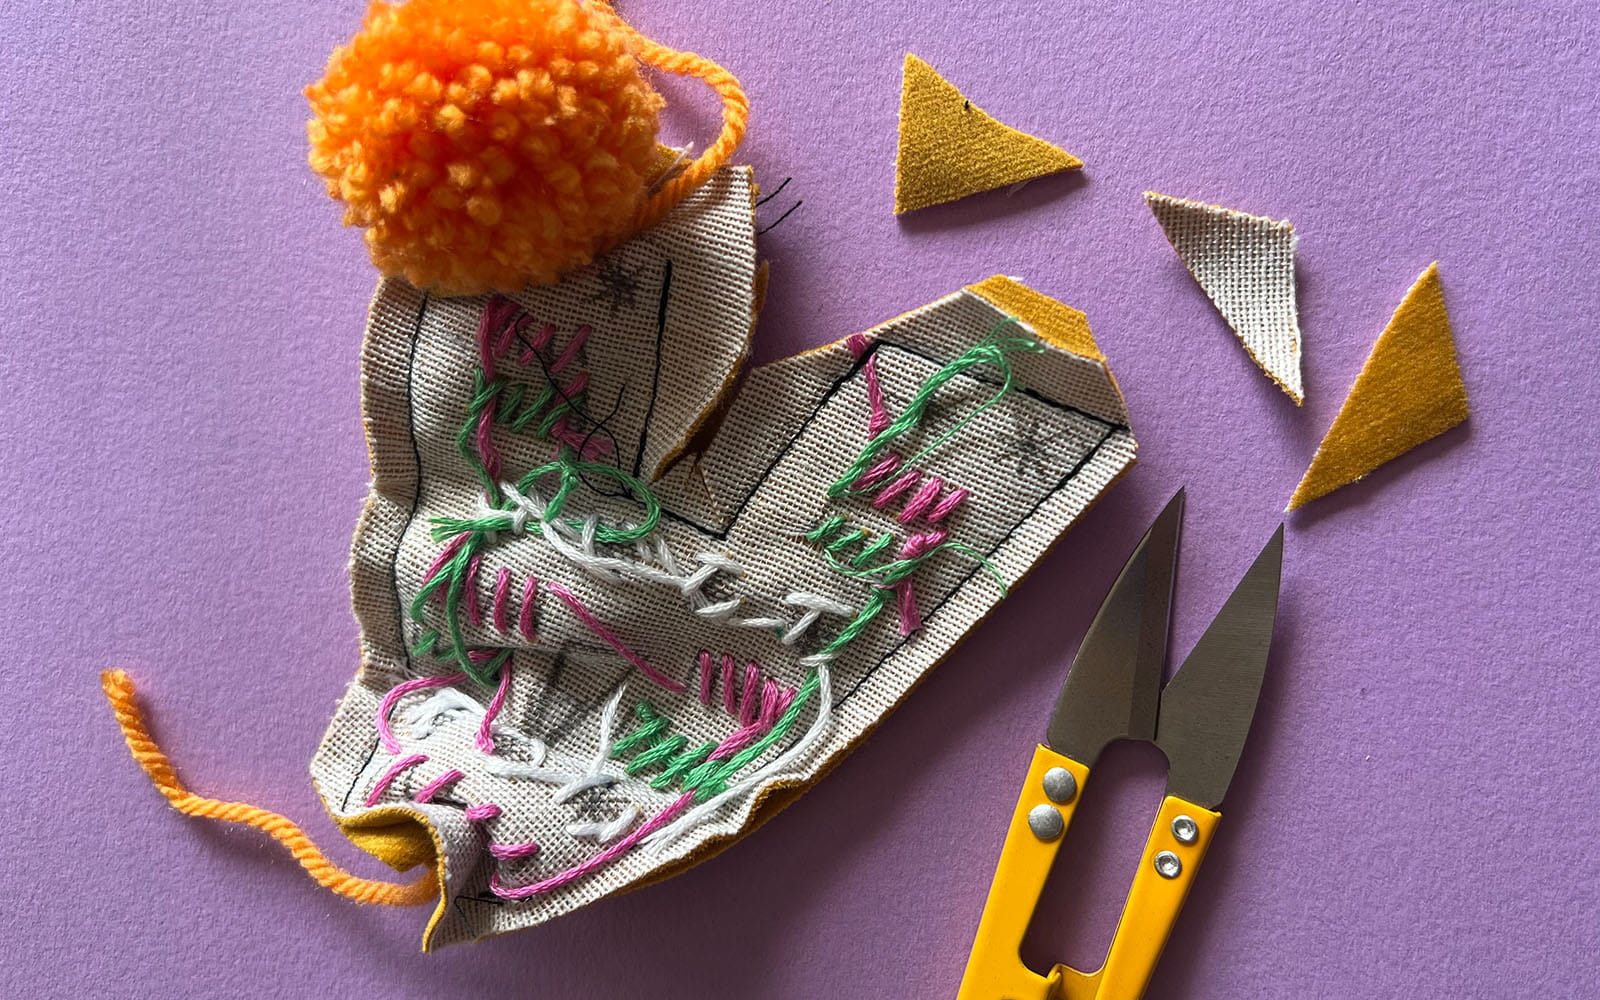 Sewing snips with clipped fabric corners